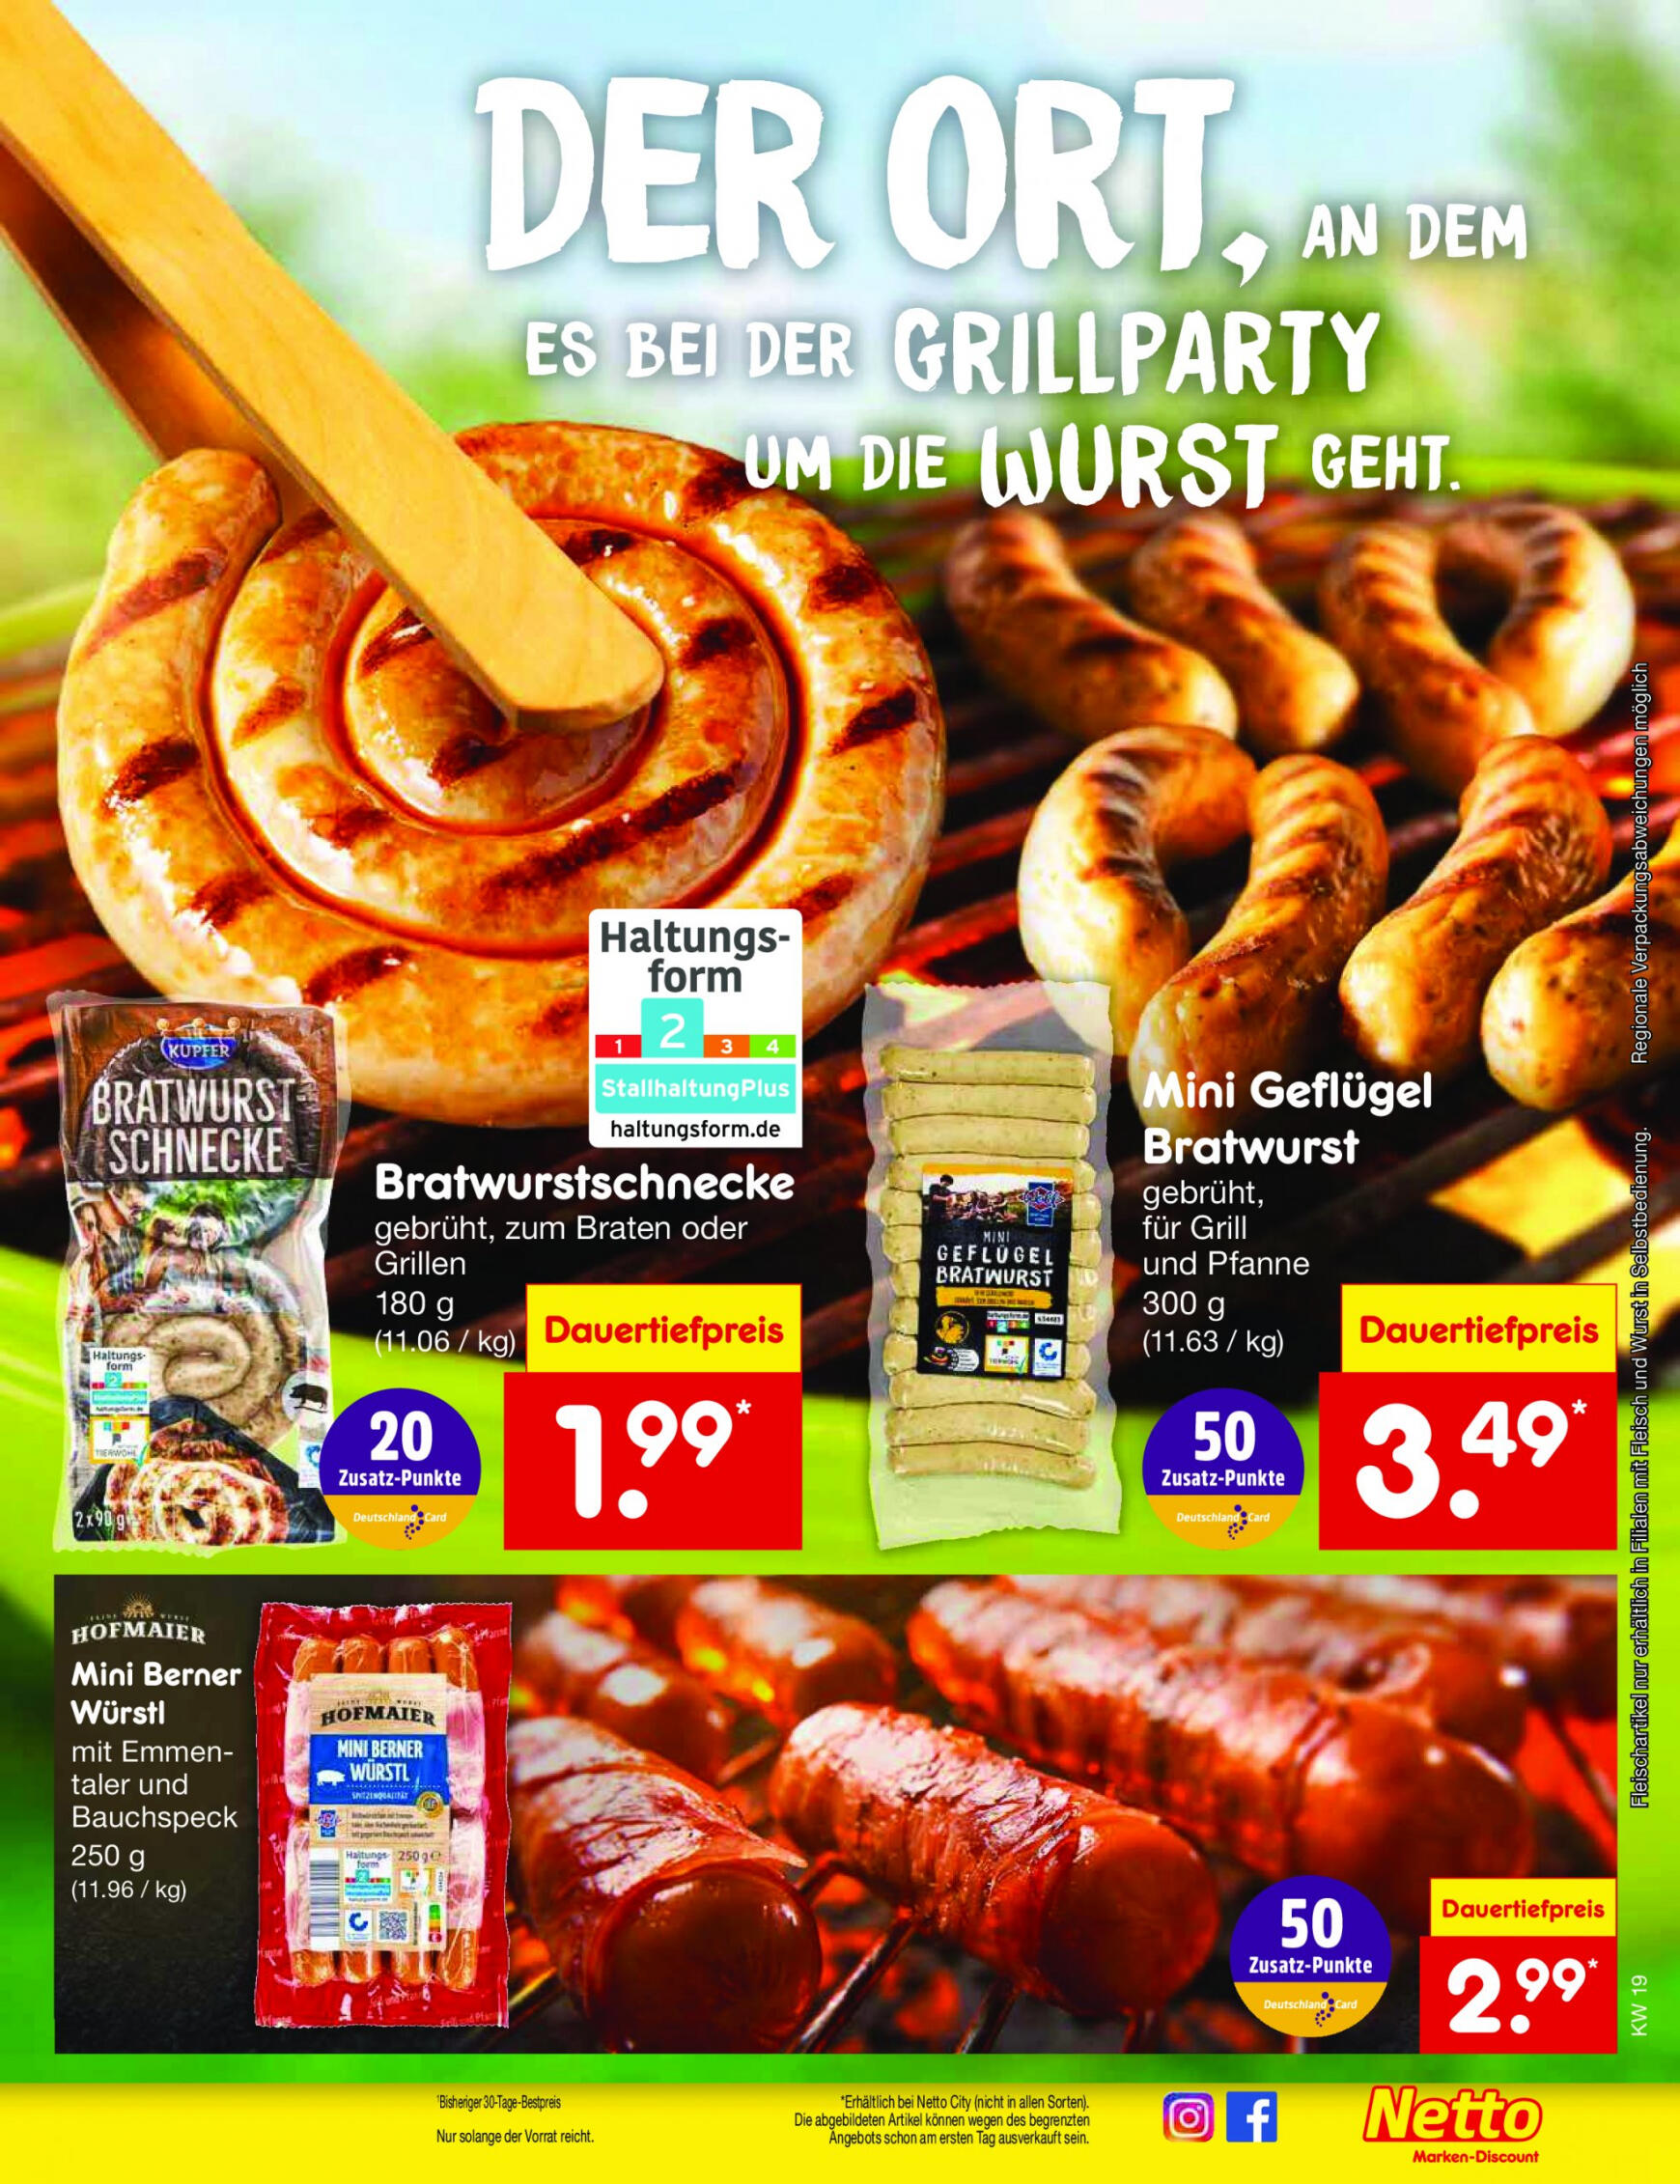 netto - Flyer Netto aktuell 06.05. - 11.05. - page: 17